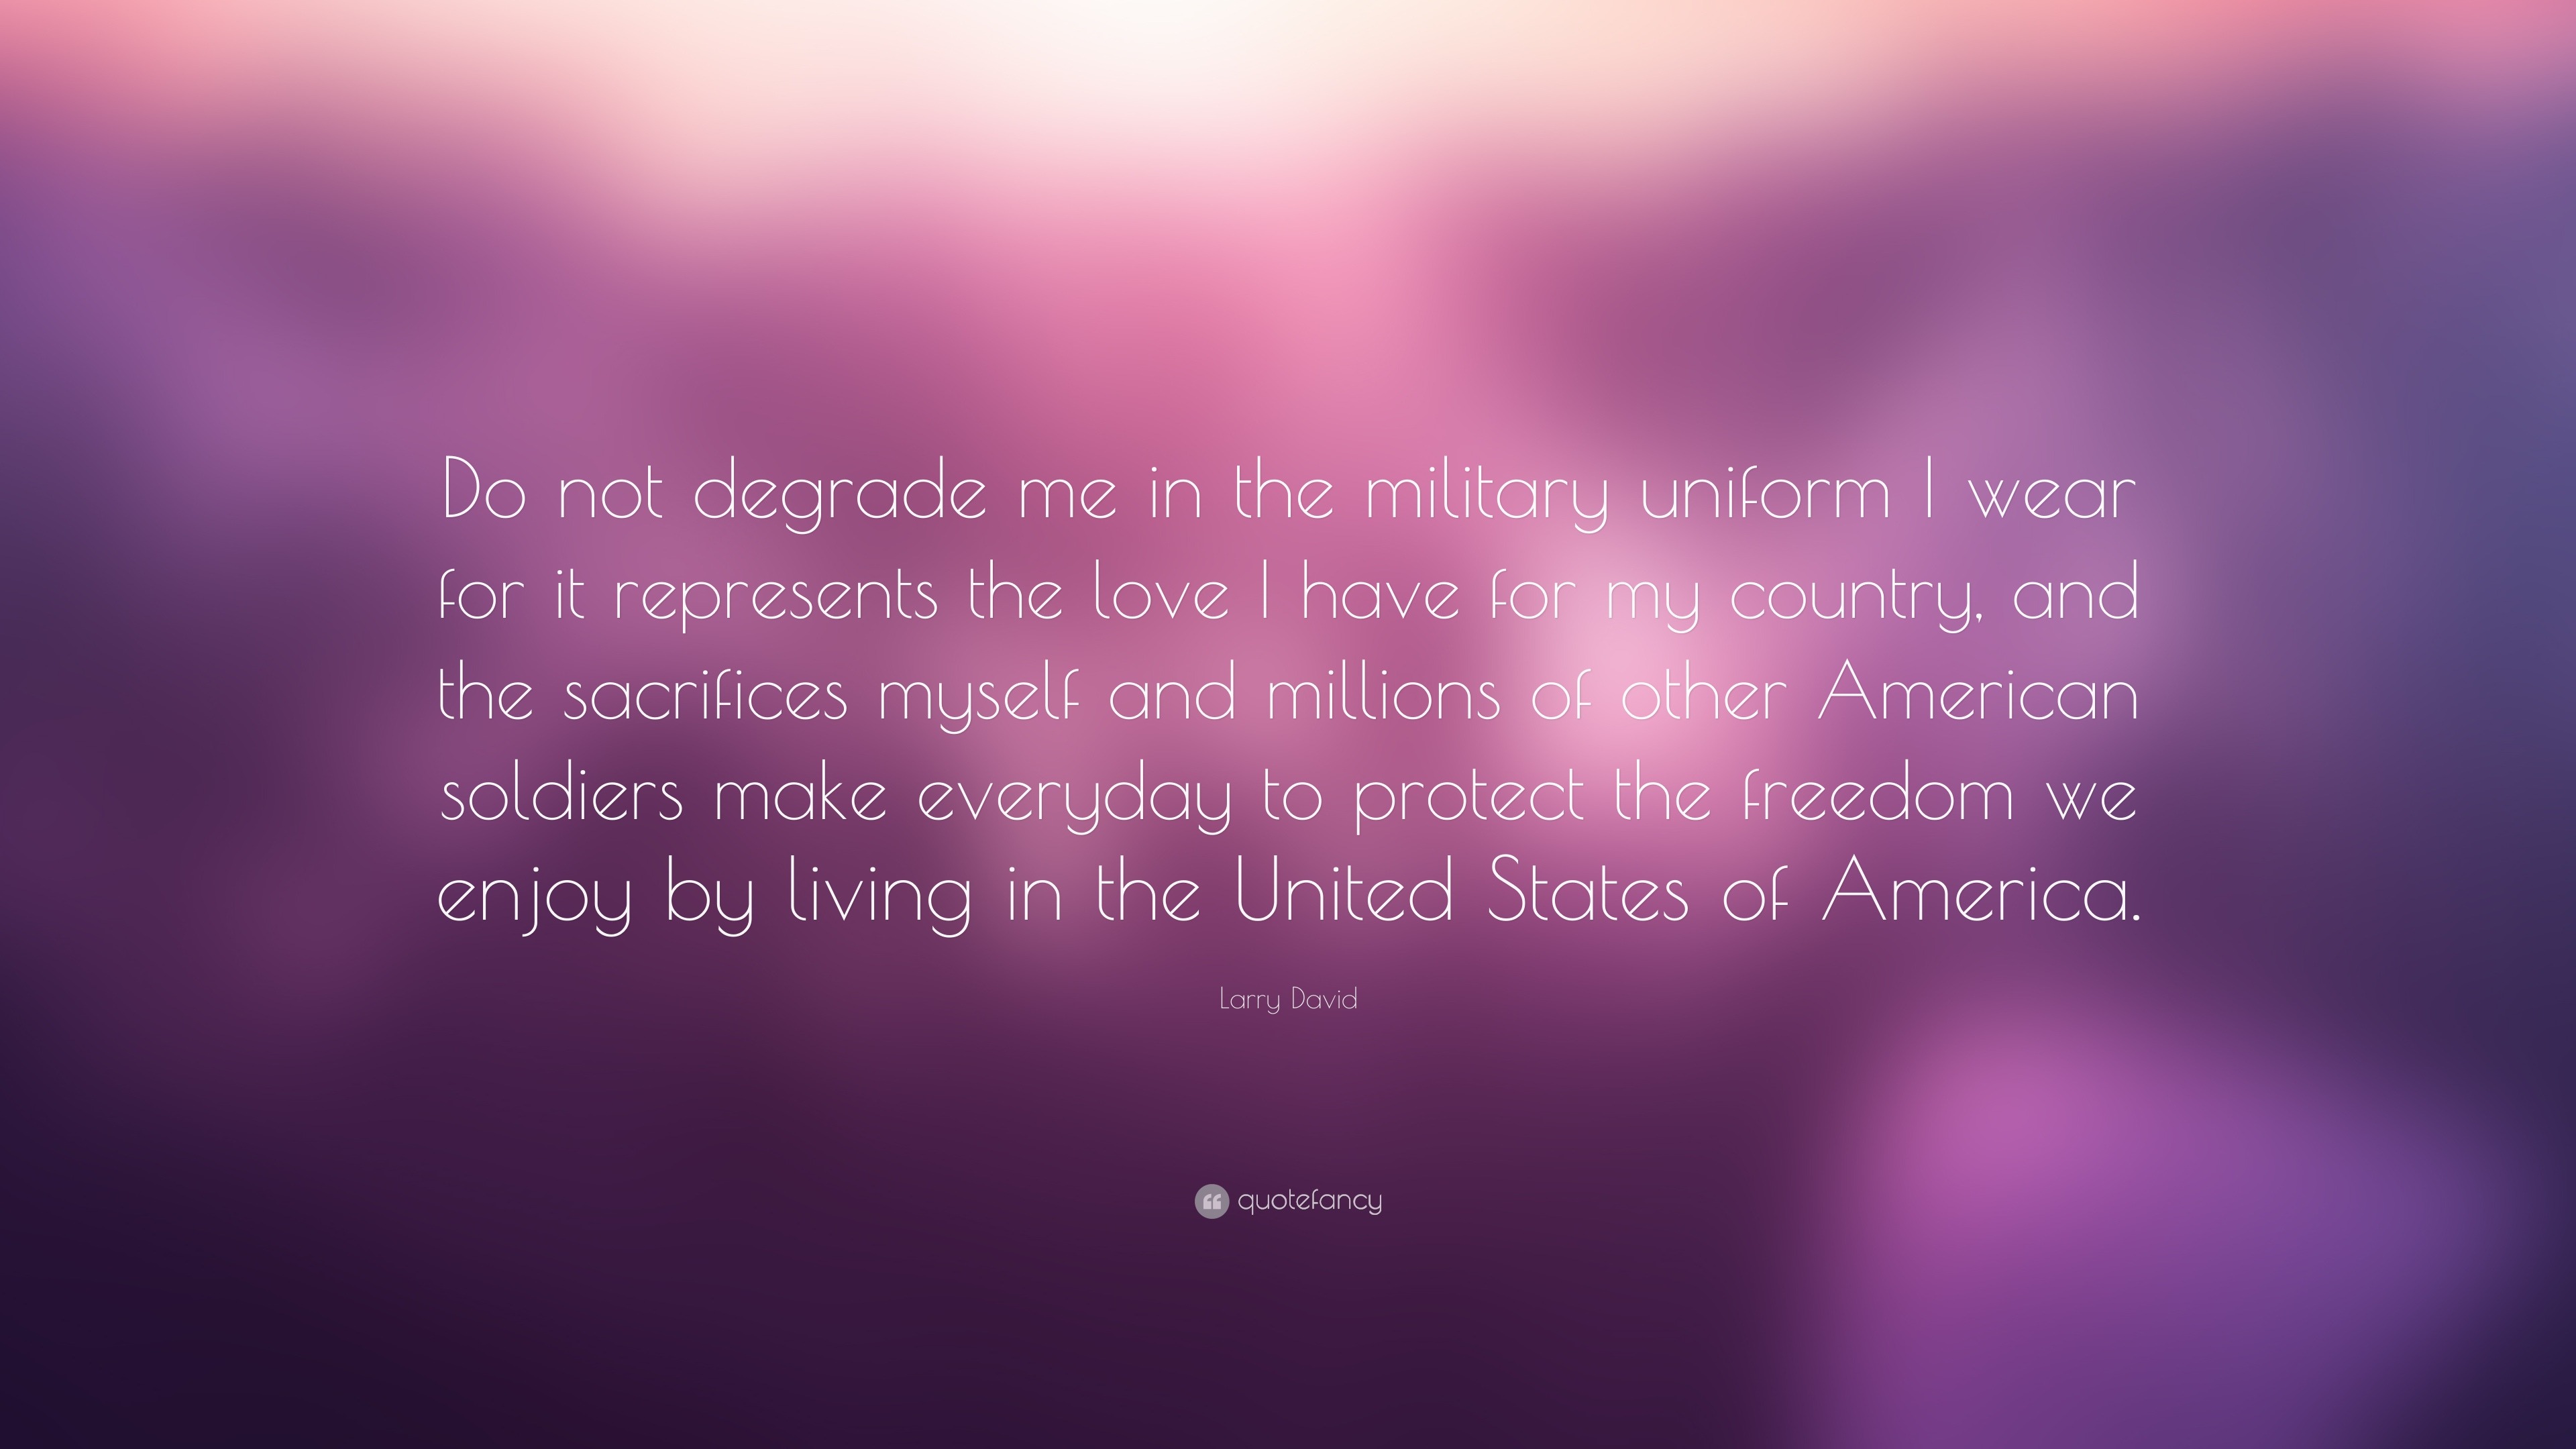 Larry David Quote “Do not degrade me in the military uniform I wear for